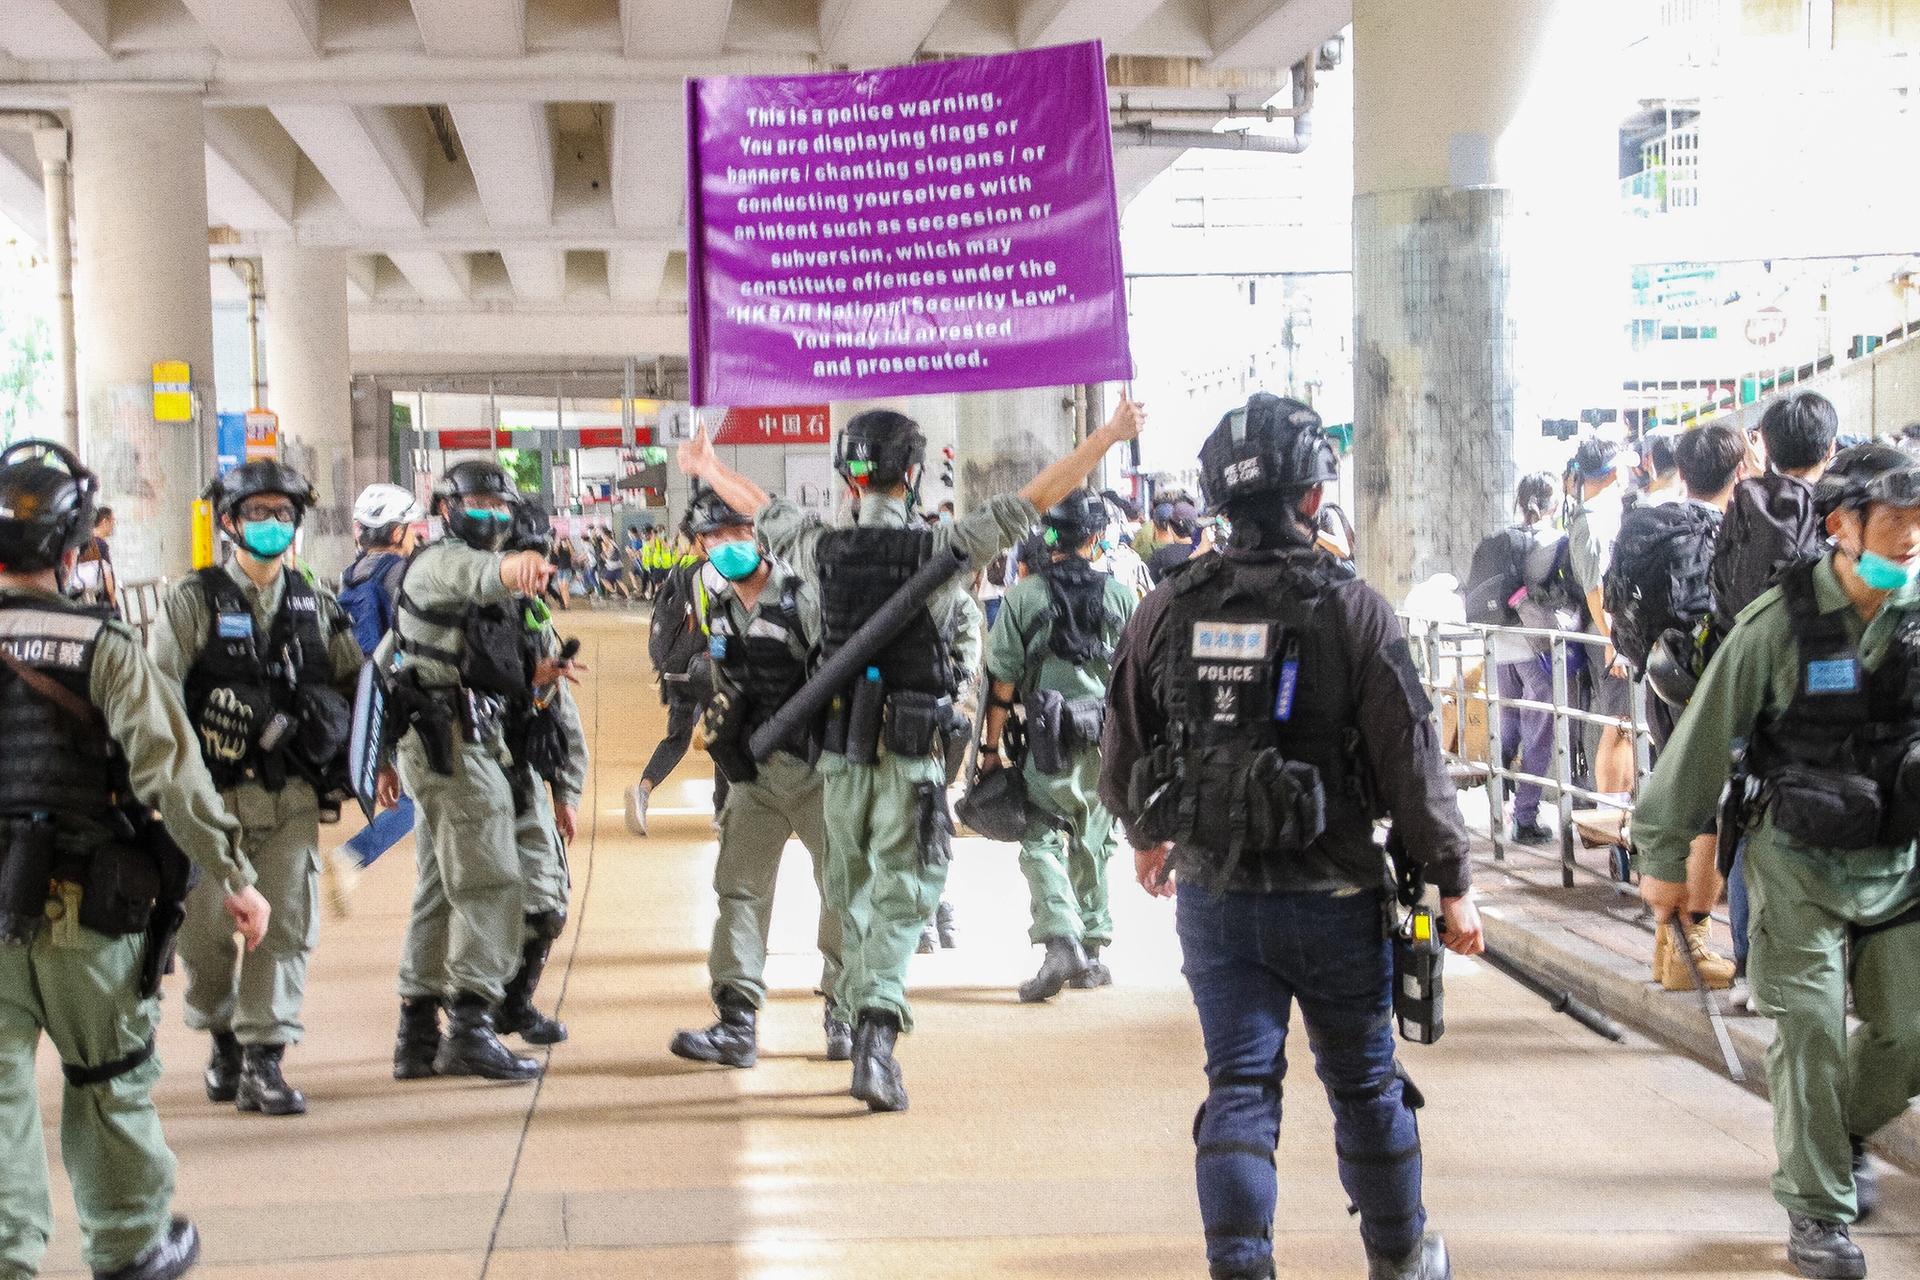 A police officer raises a purple flag that warns protesters that they are breaching the newly imported National Security Law from China during street protests in Hong Kong on 1 July Photo: Tommy Walker/NurPhoto via Getty Images